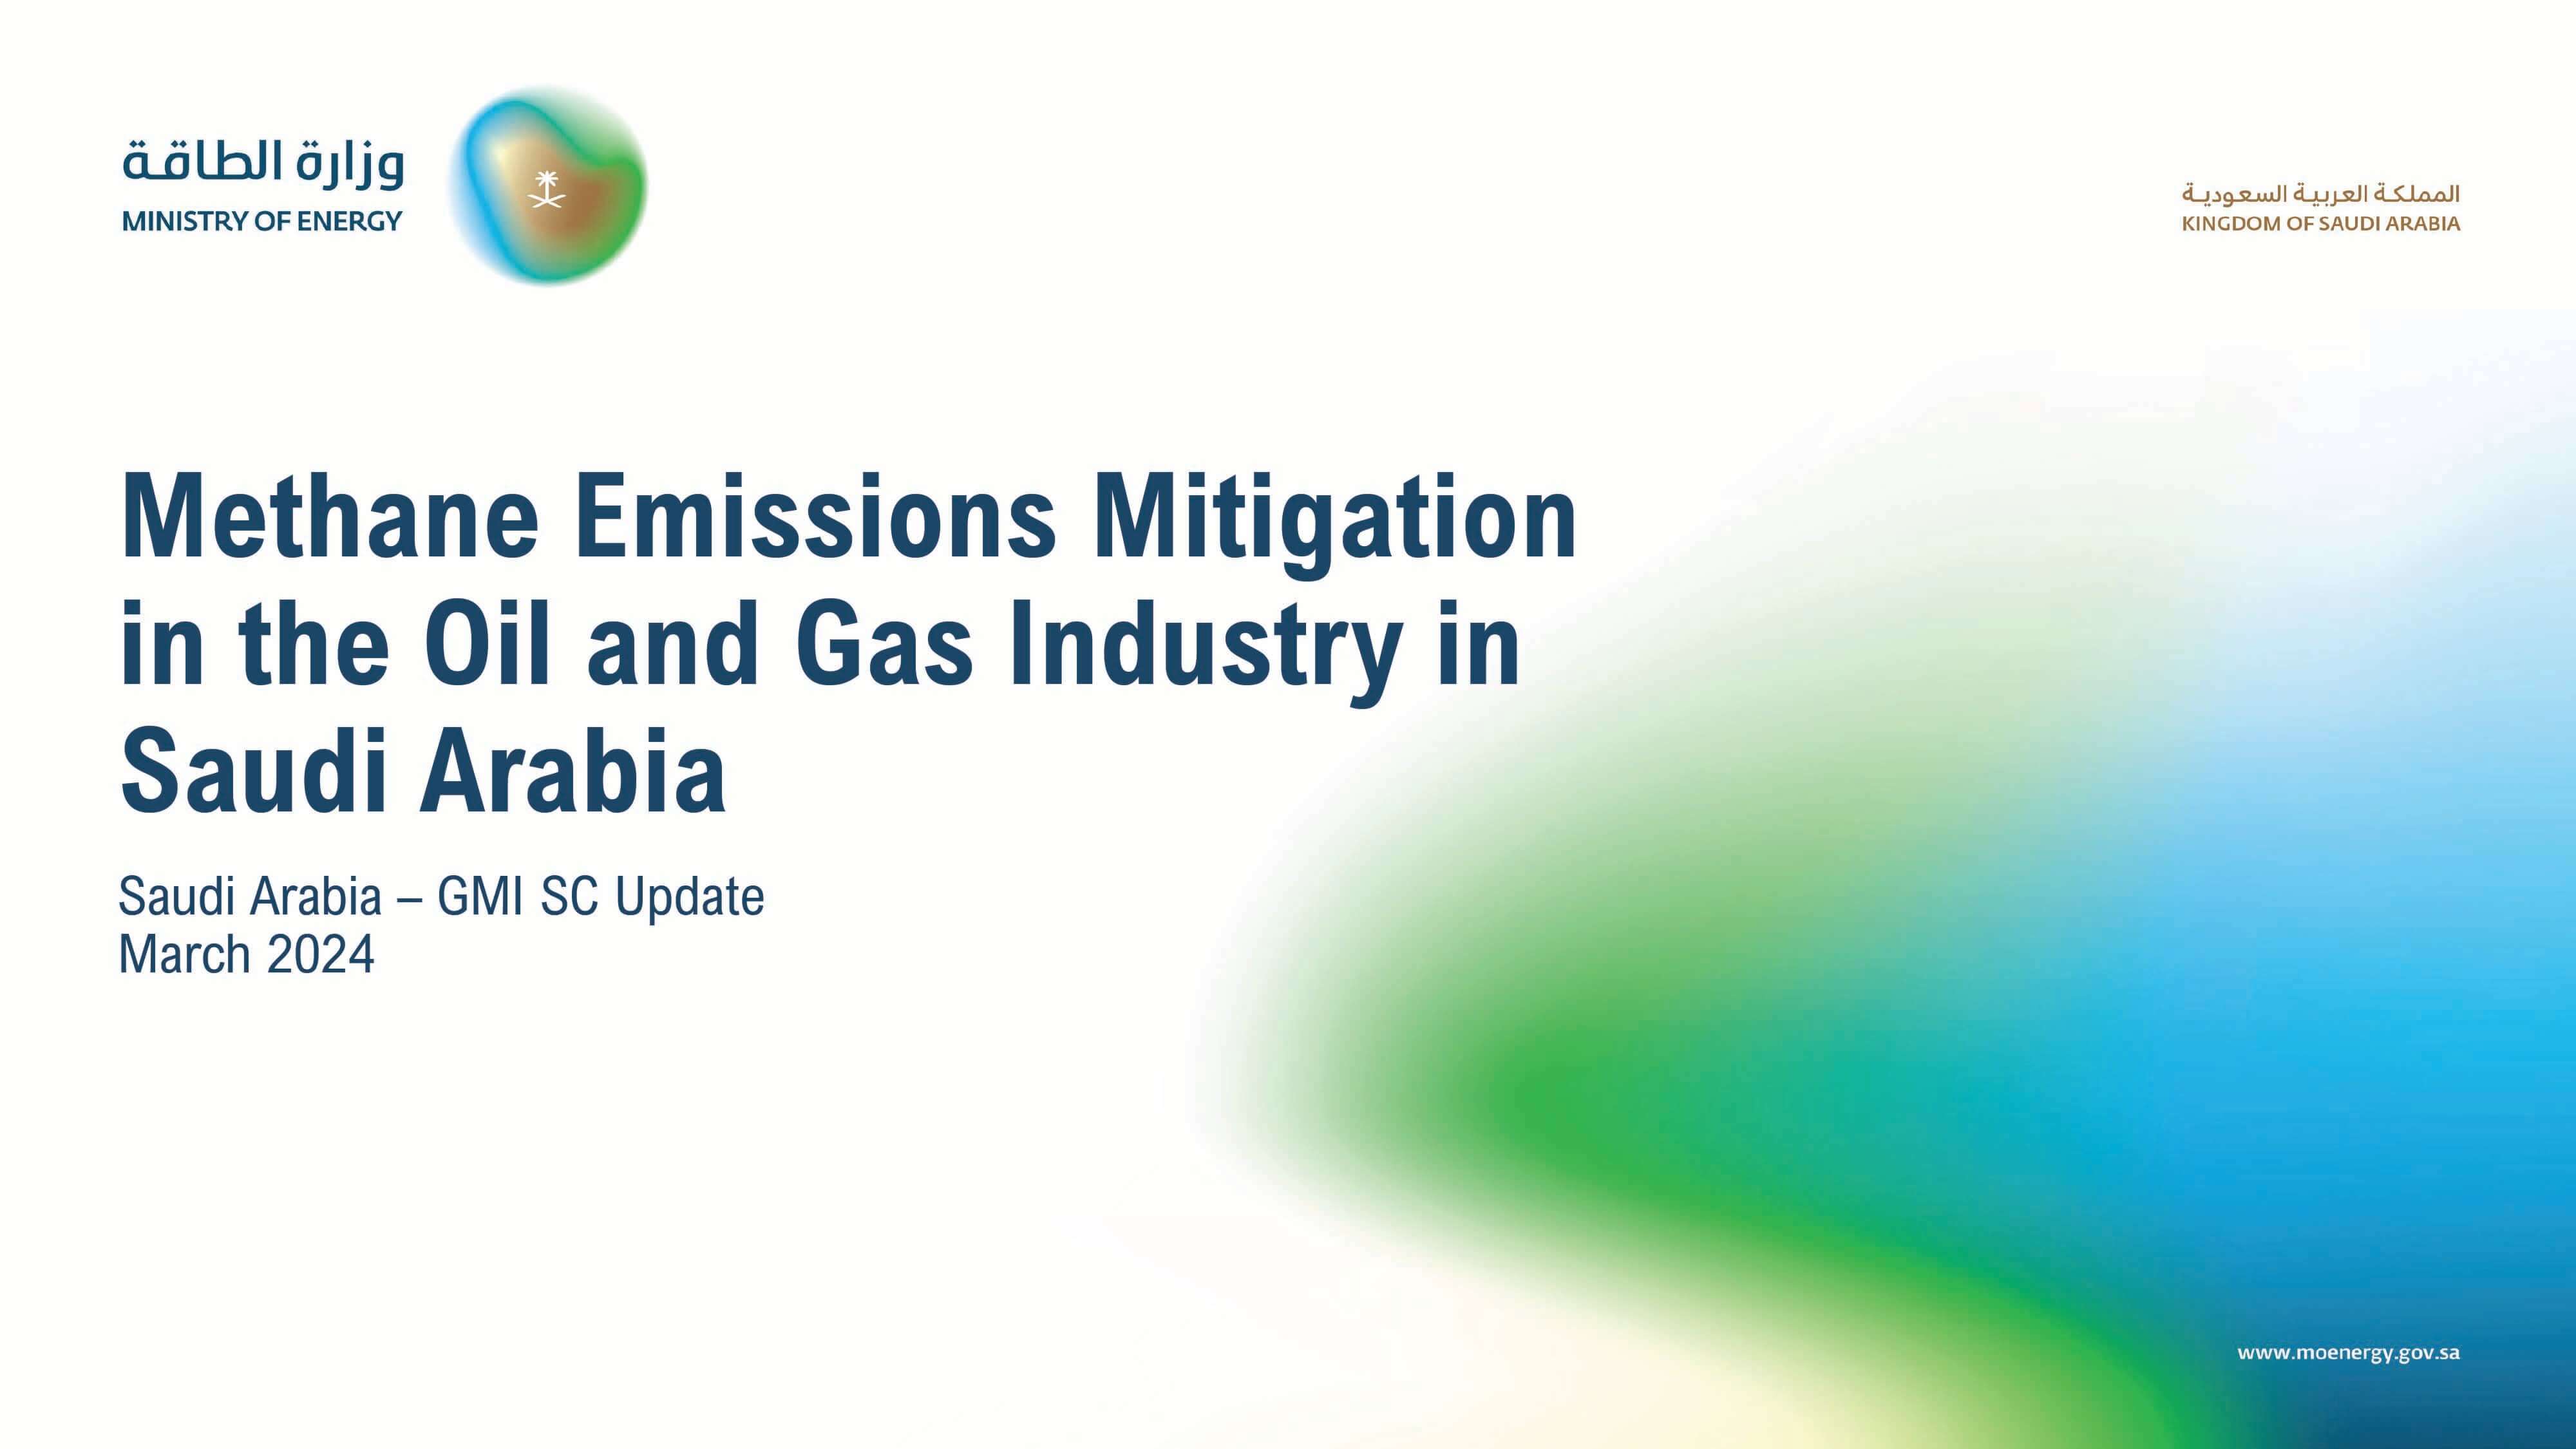 Methane Emissions Mitigation in the Oil and Gas Industry in Saudi Arabia